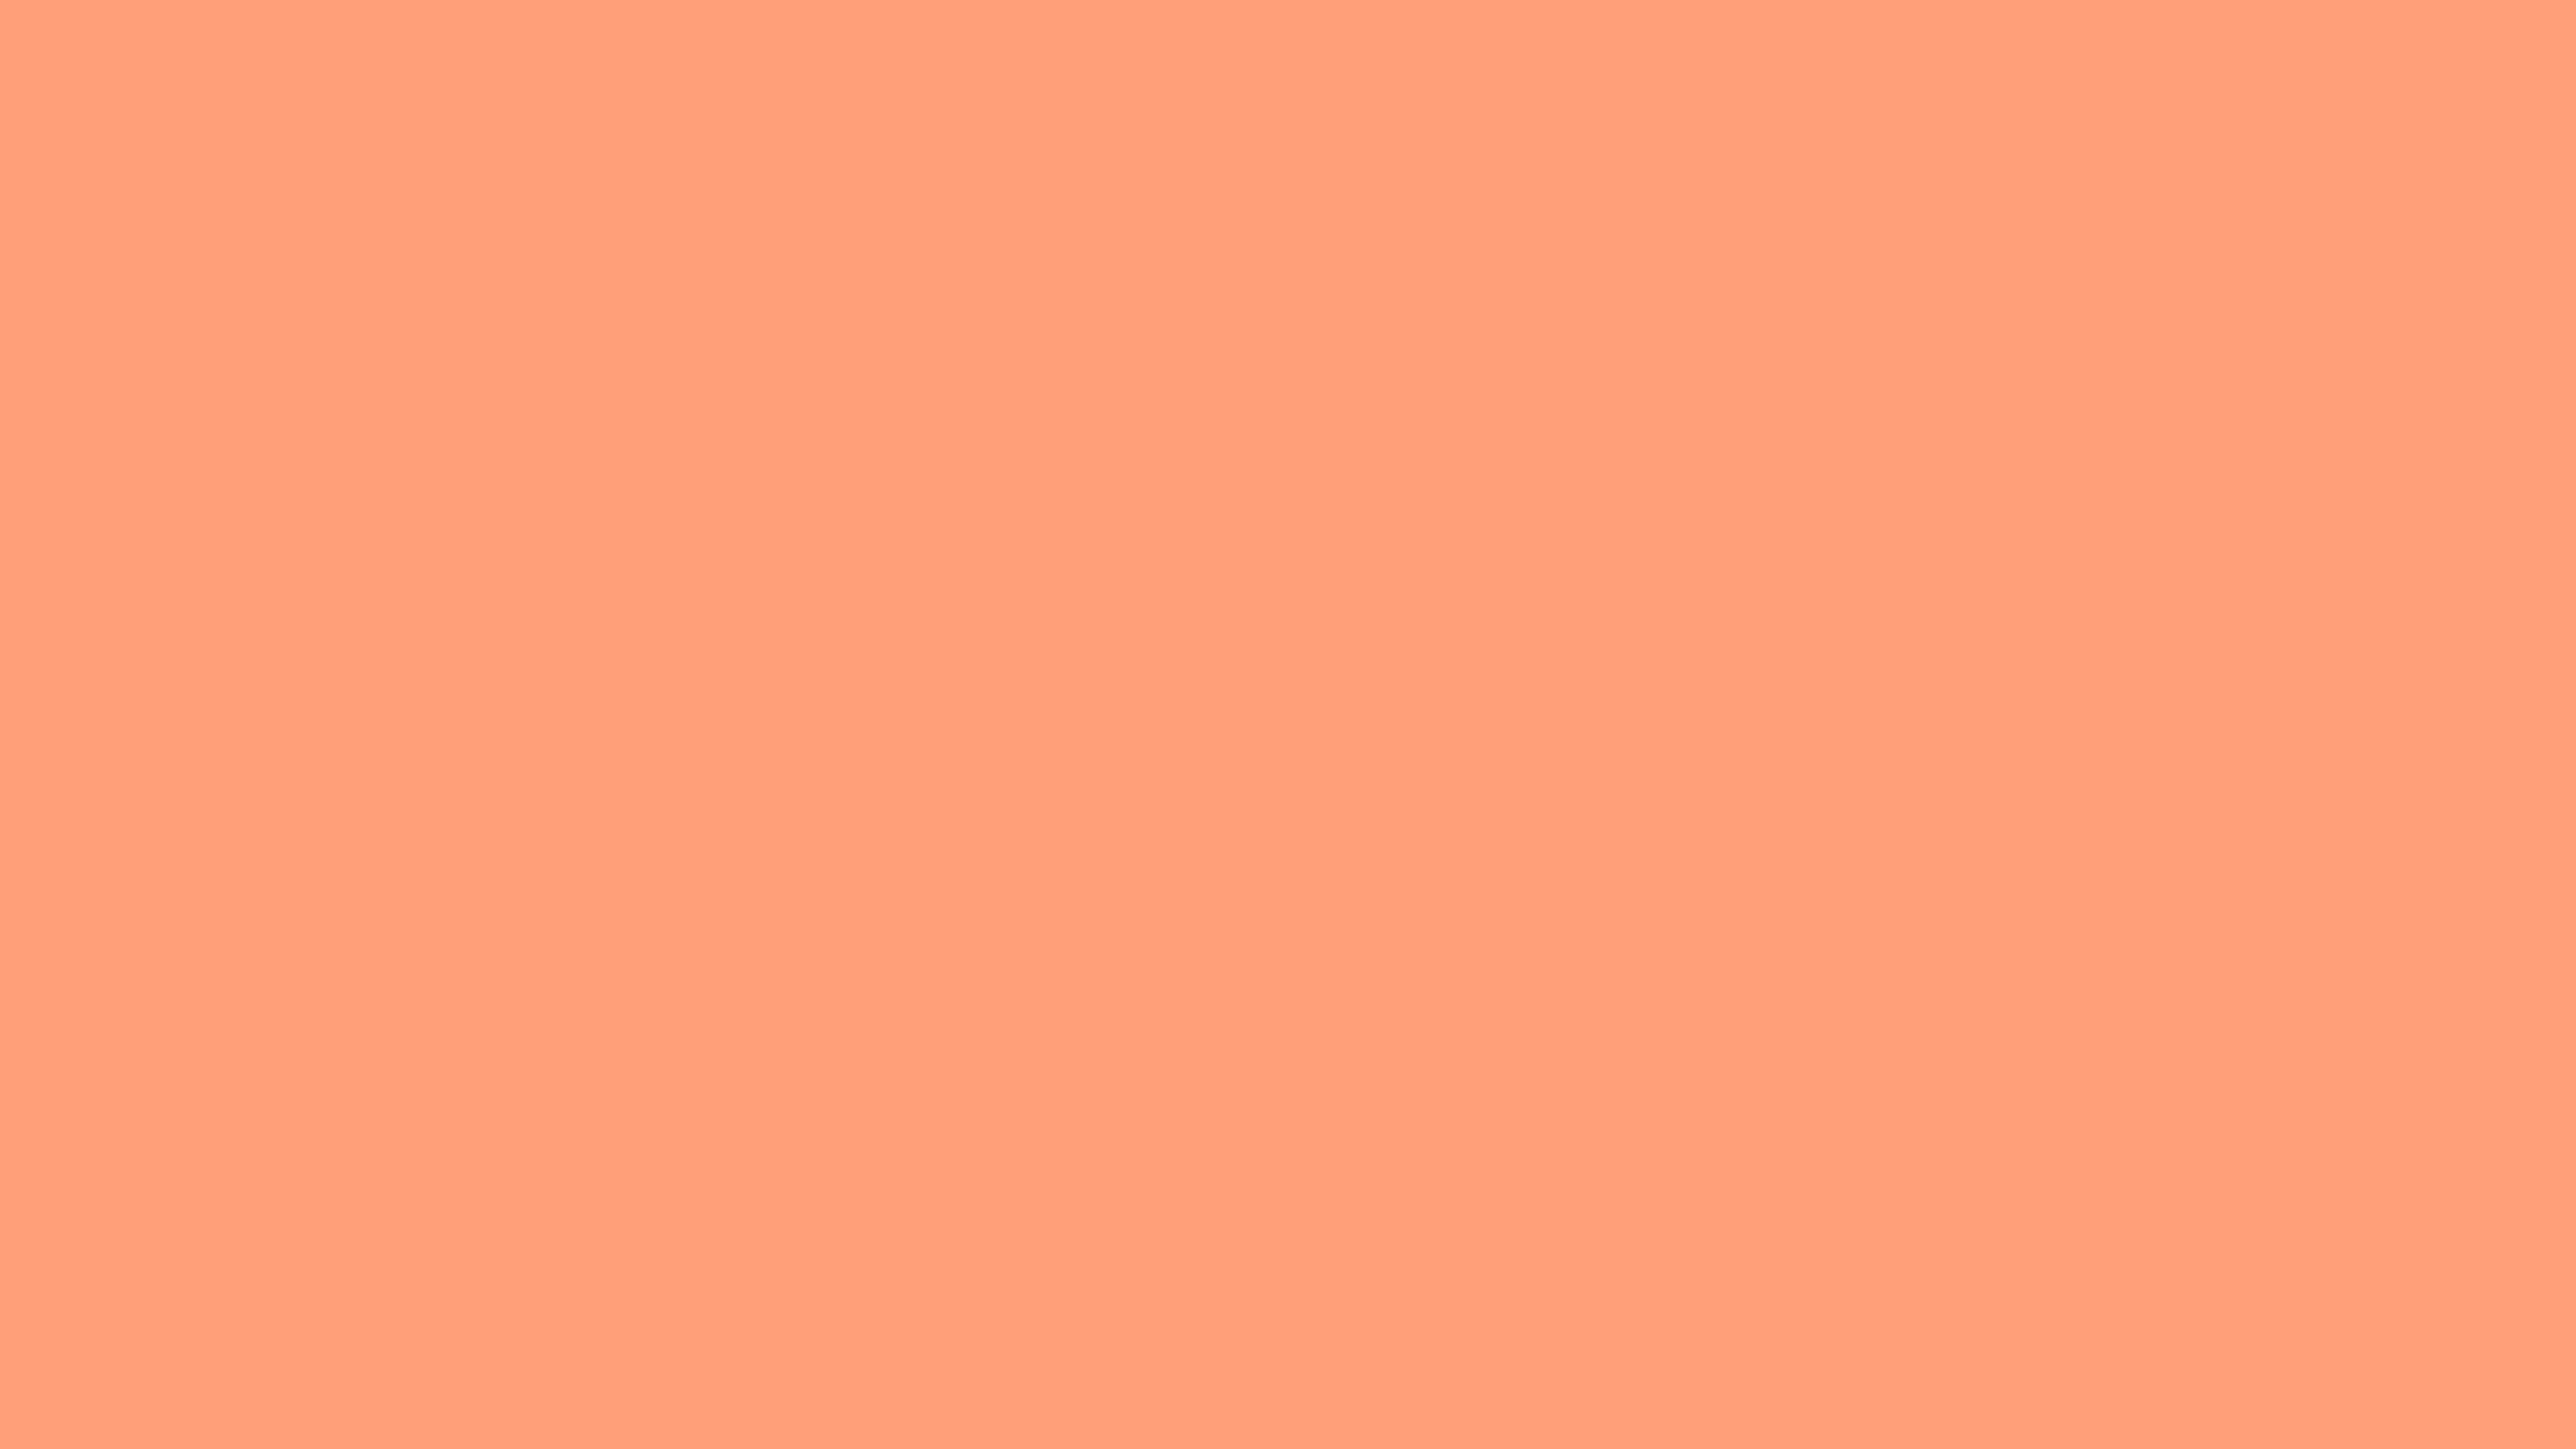 5120x2880 Light Salmon Solid Color Background